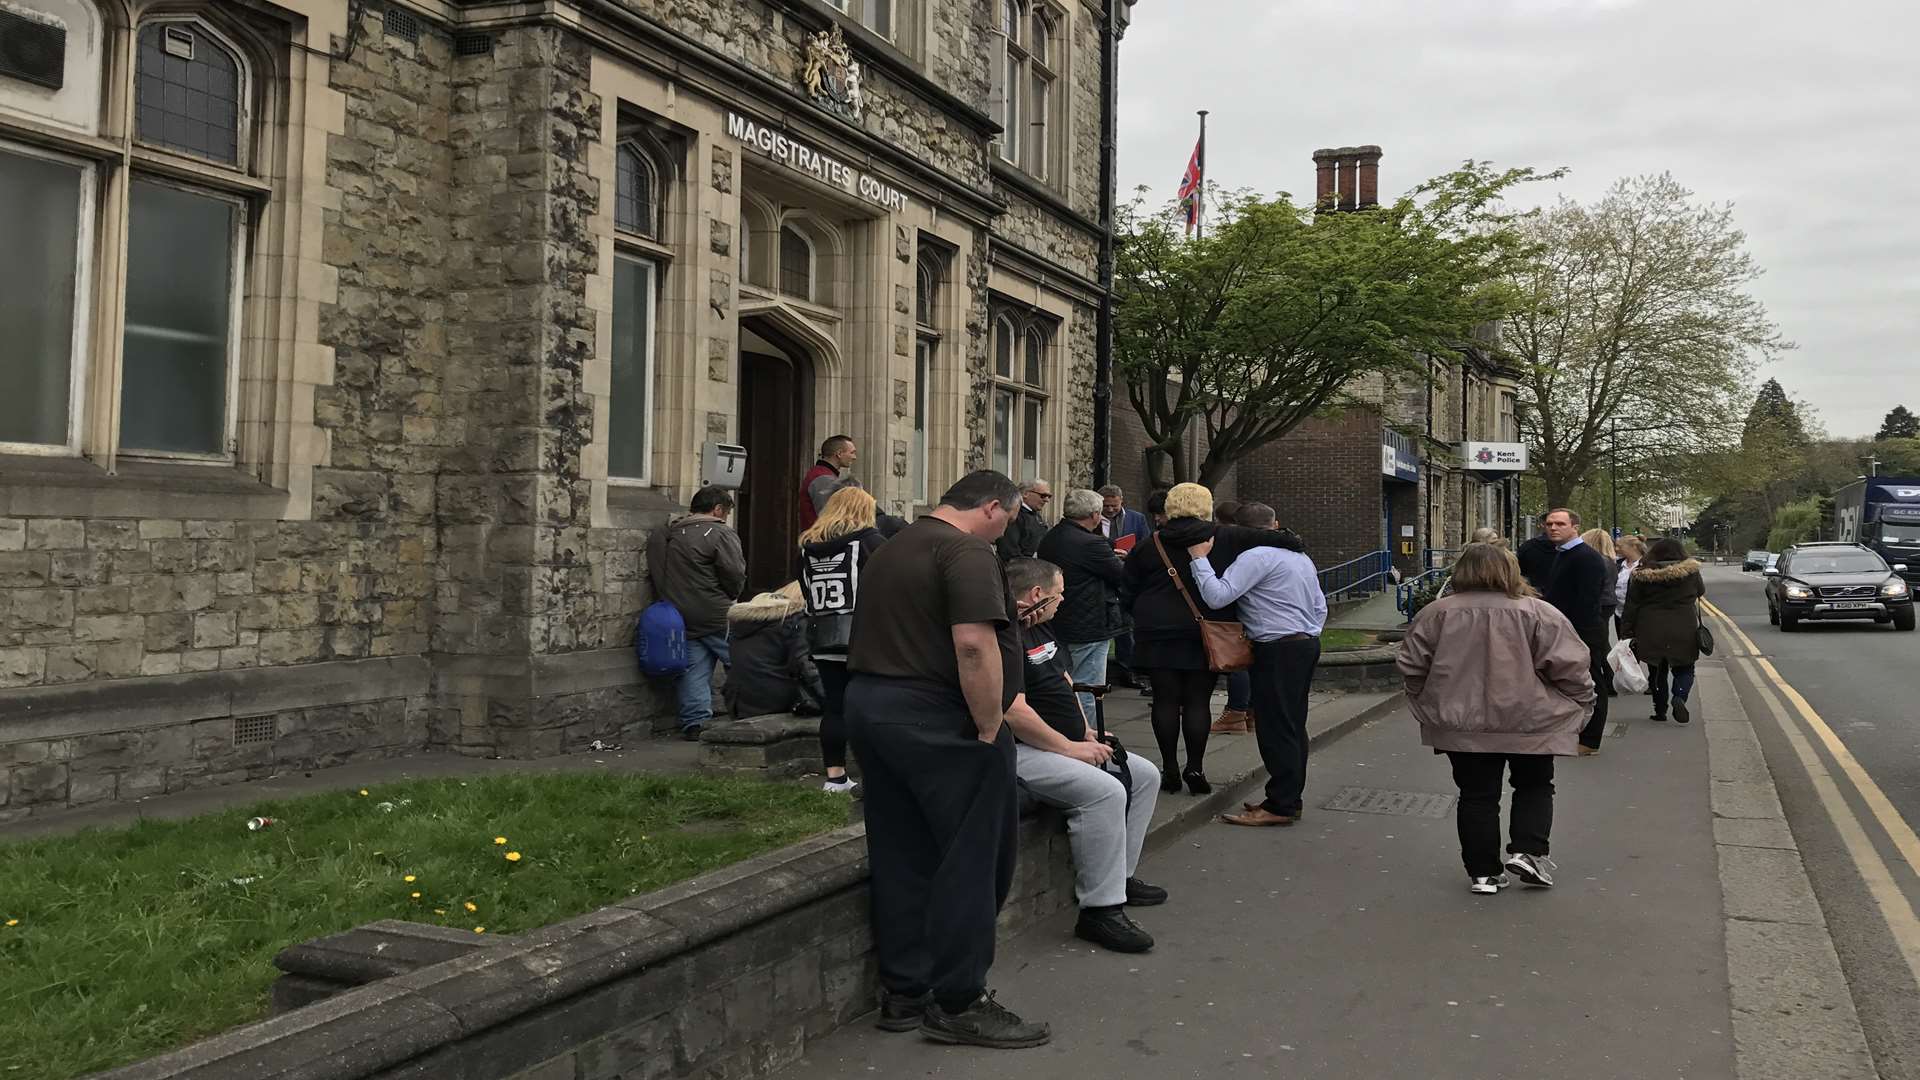 People waiting outside Maidstone Magistrates' Court were told all cases have been cancelled today